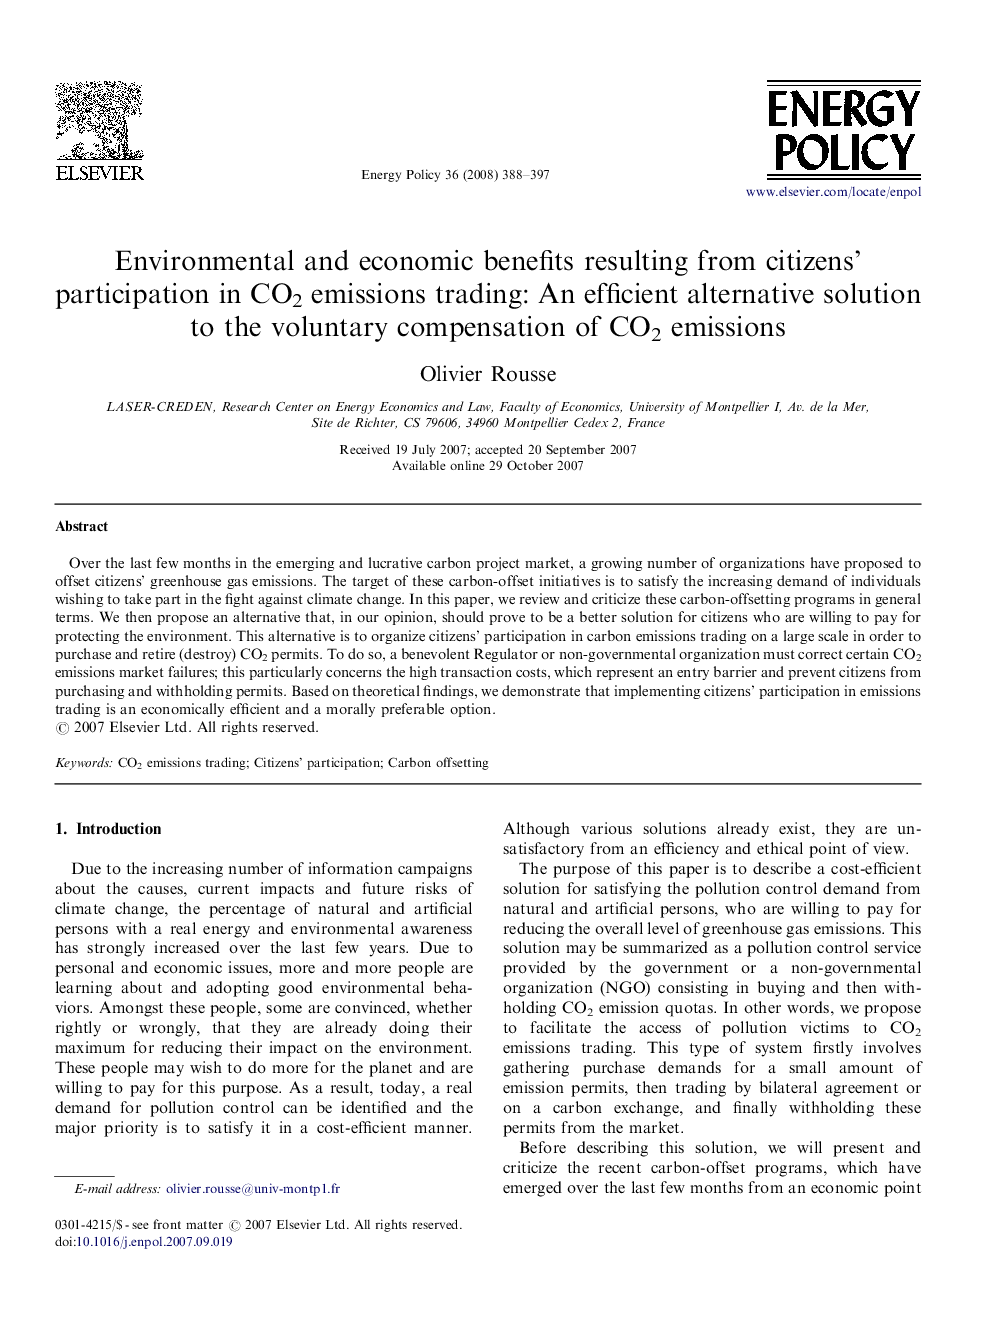 Environmental and economic benefits resulting from citizens’ participation in CO2 emissions trading: An efficient alternative solution to the voluntary compensation of CO2 emissions